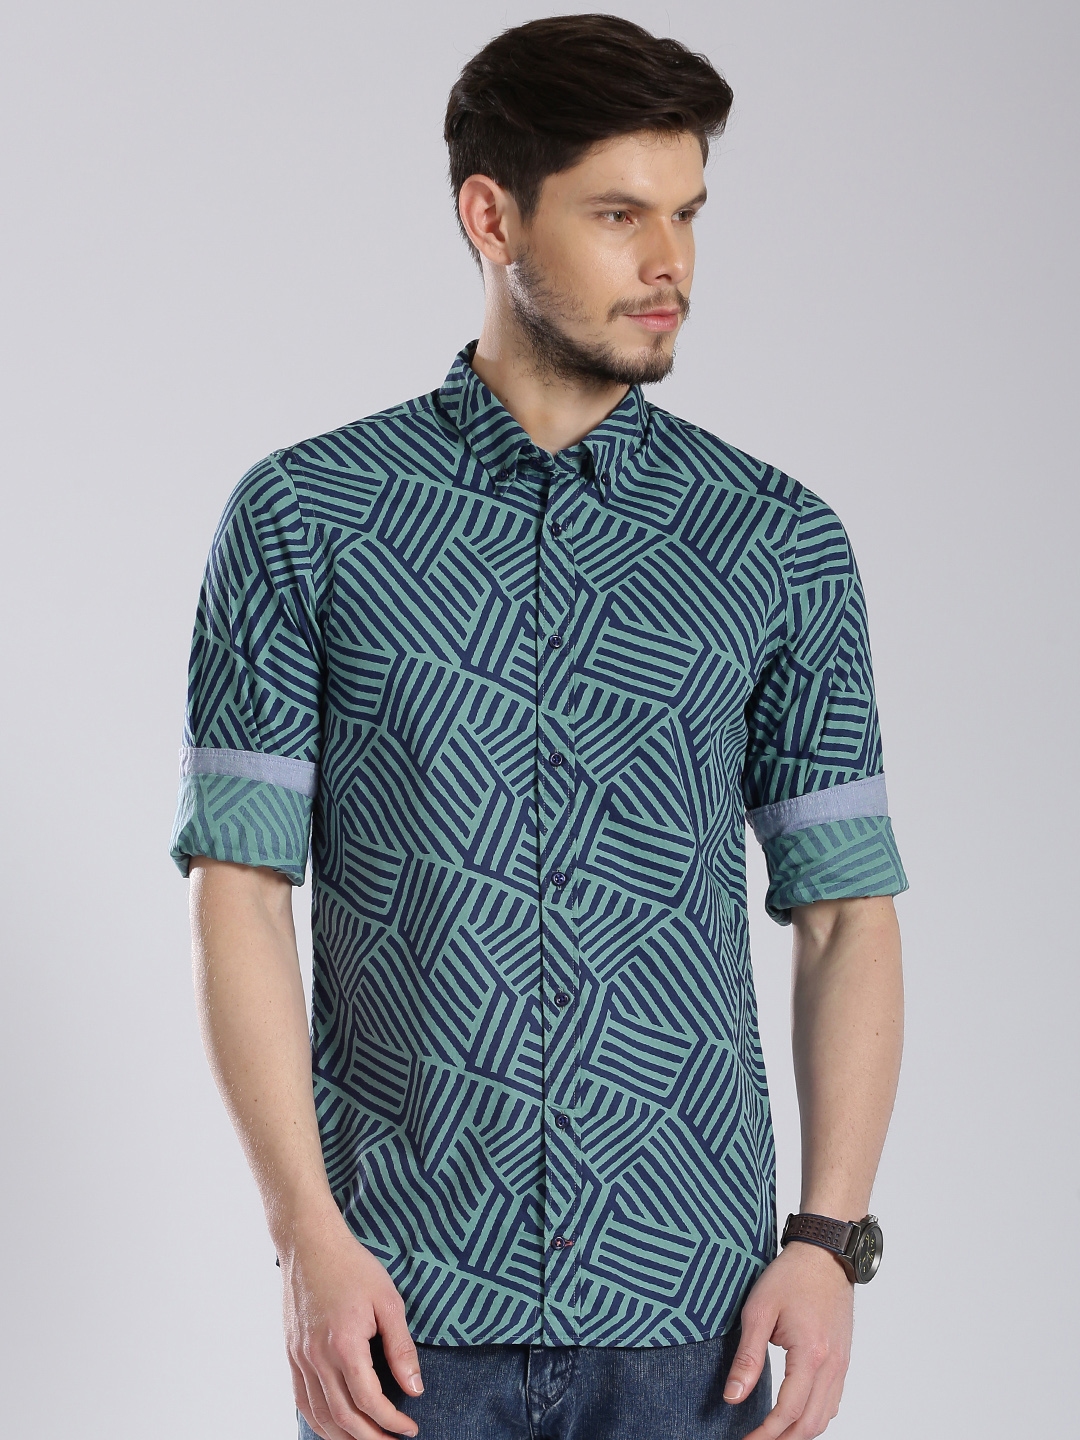 Buy Tommy Hilfiger Teal Green & Navy Printed Slim Fit Casual Shirt ...